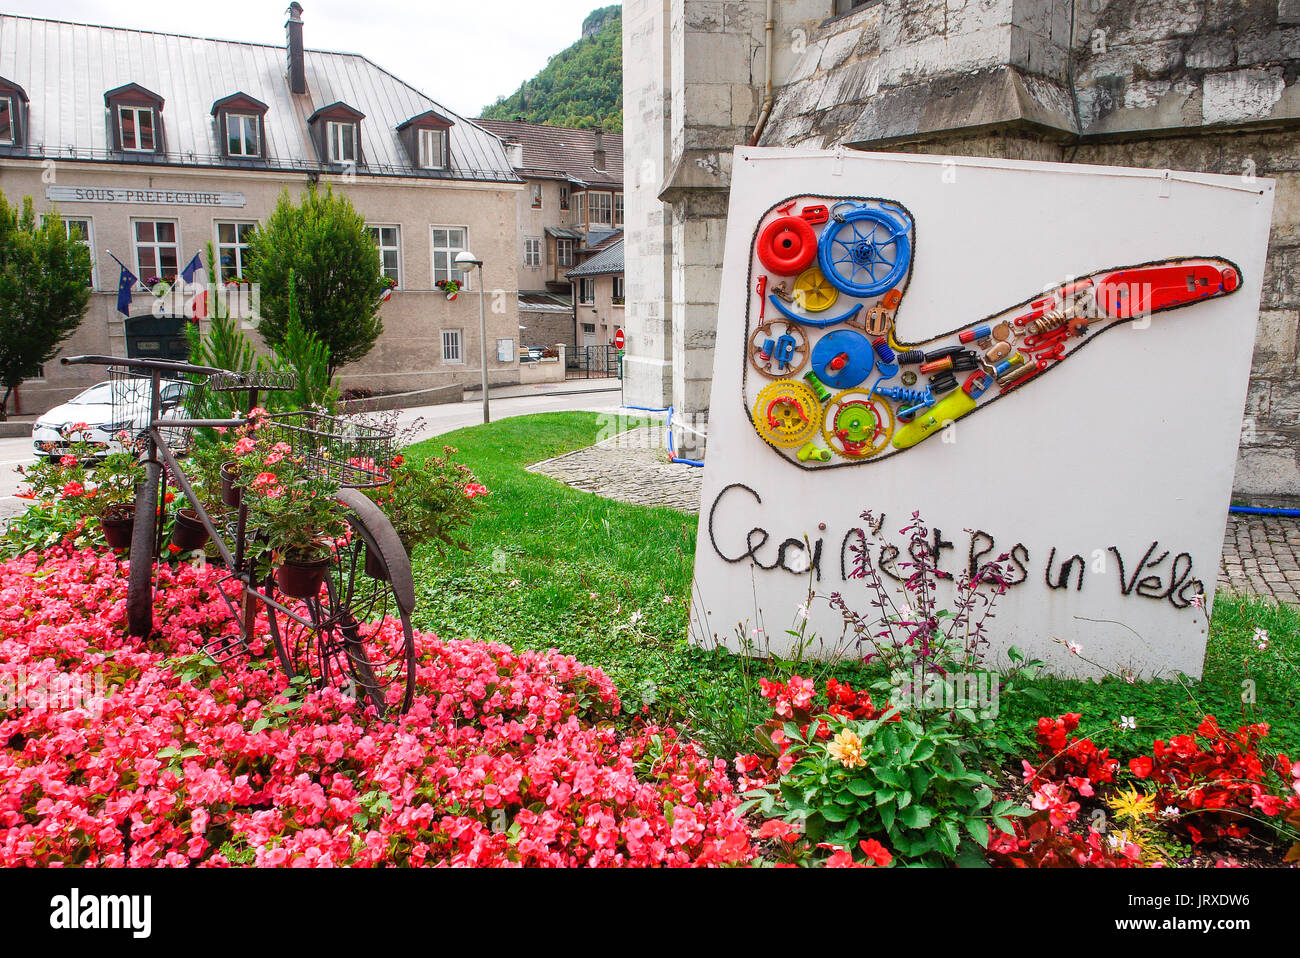 Artwork in a public garden pays homage to pipes making local tradition, Saint-Claude, Franche-Comté, Jura (France) Stock Photo